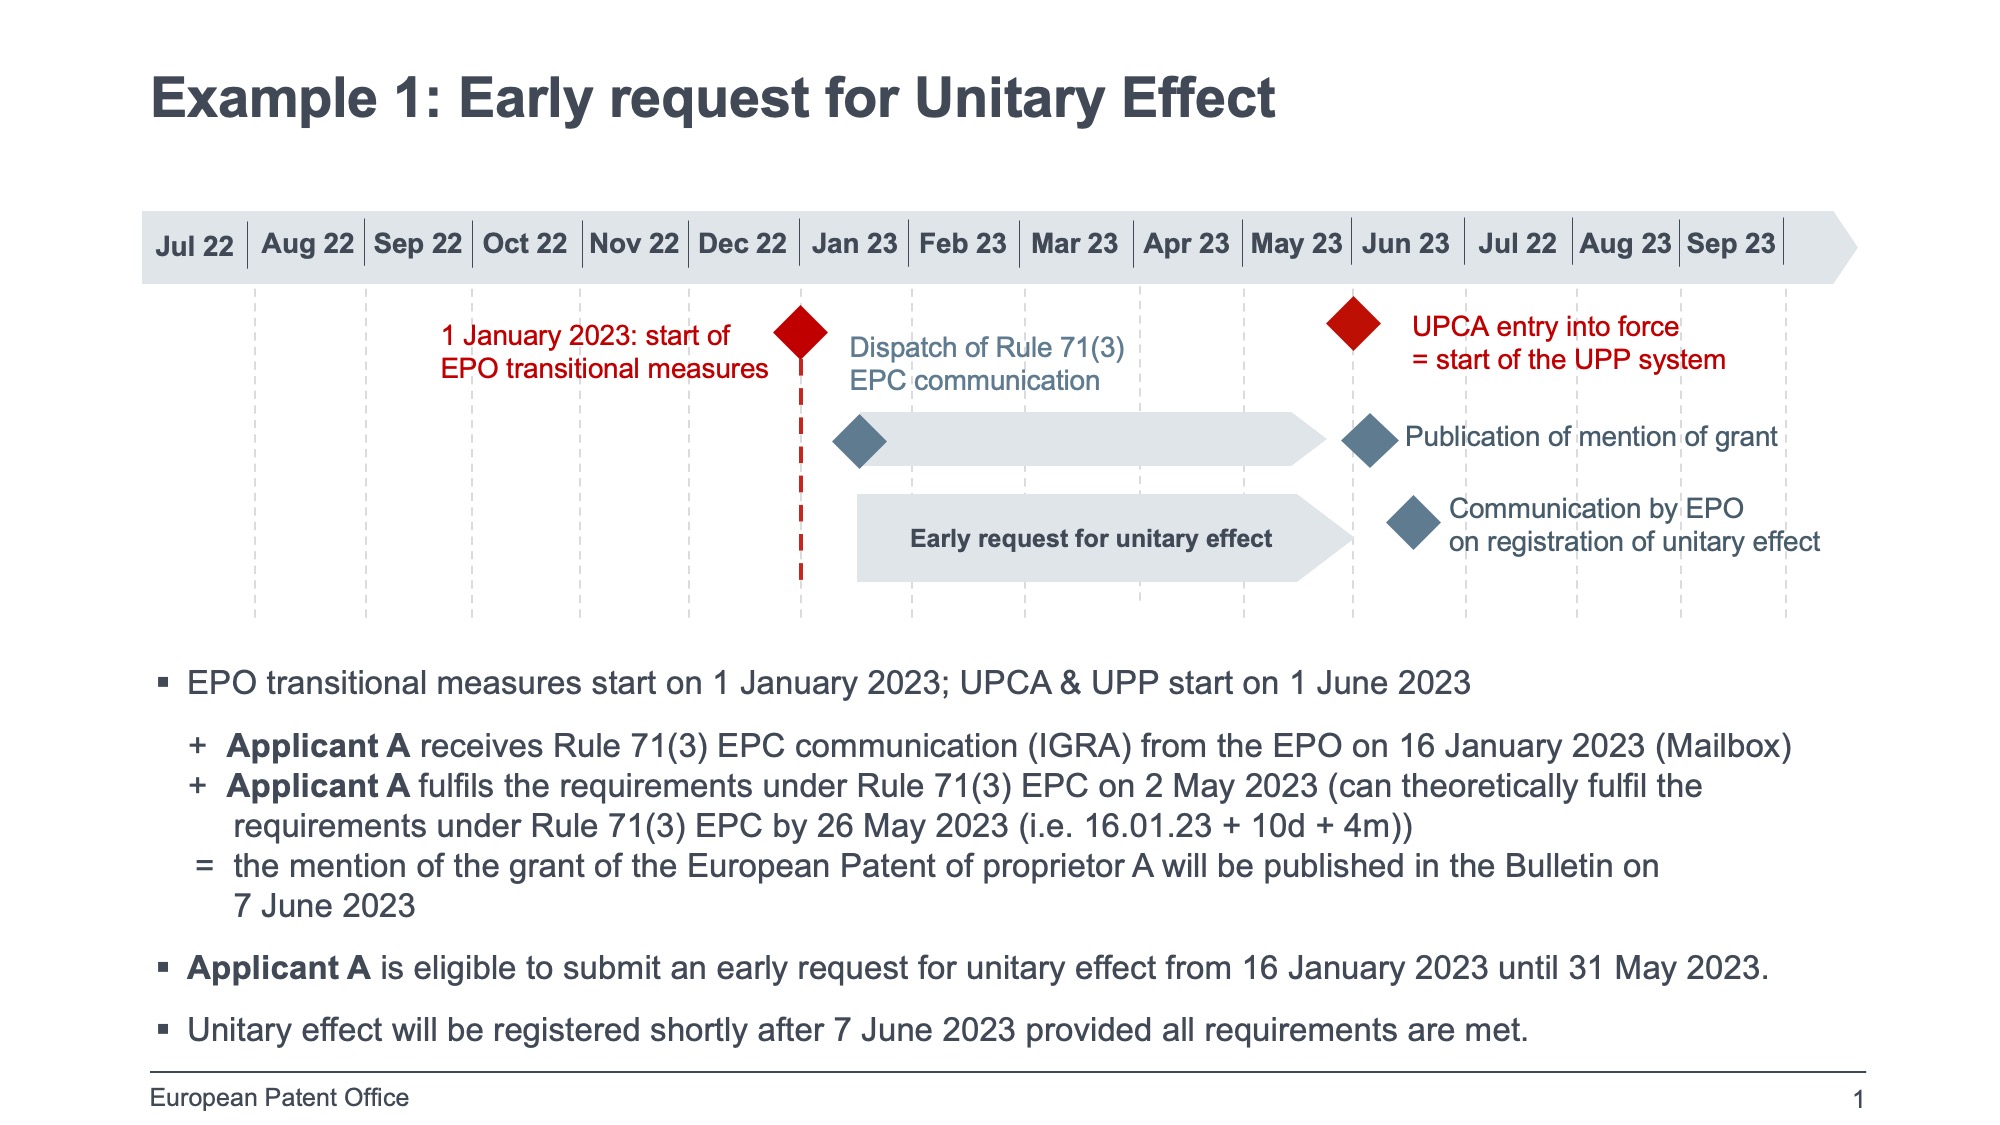 unitary effect for the patent if the communication under Rule 71 November 2022